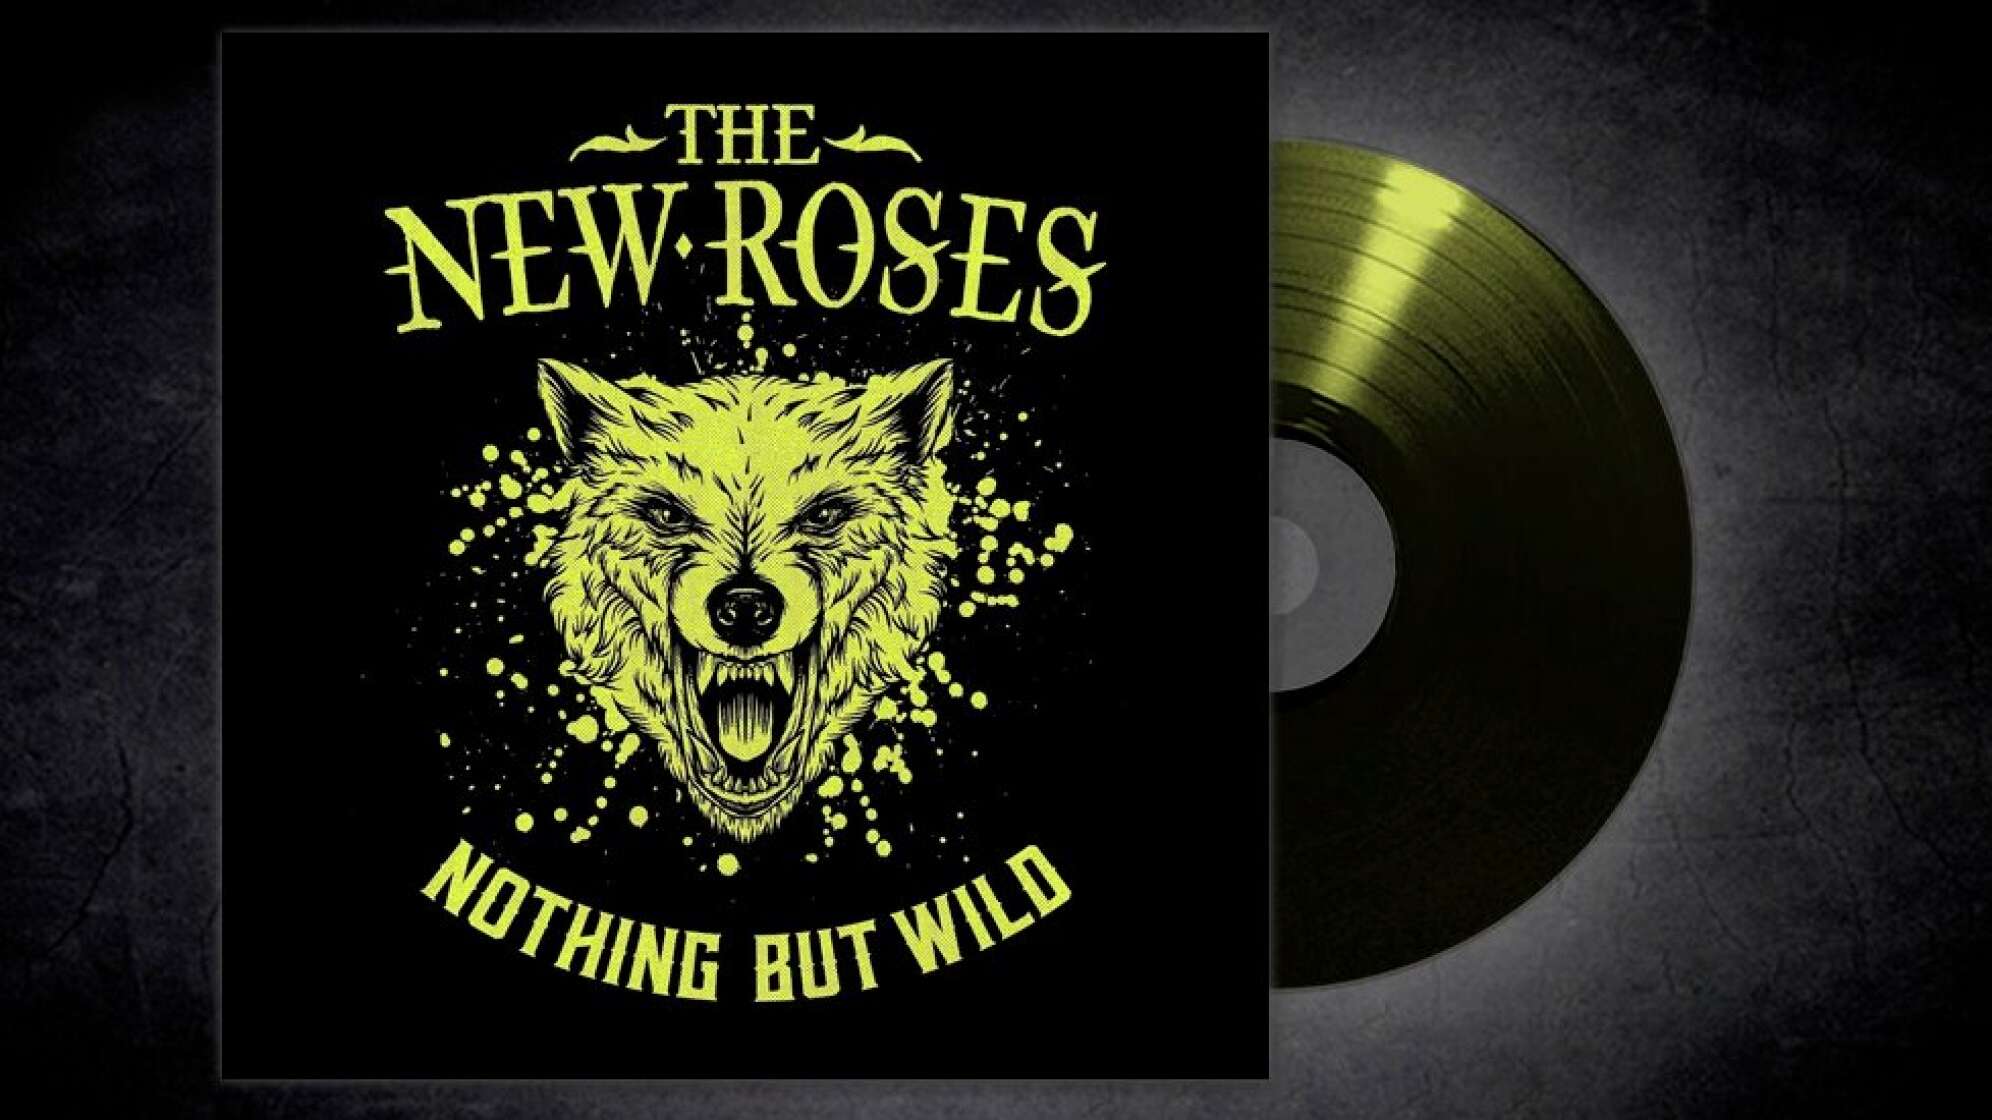 Album-Cover: The New Roses - Nothing but Wild